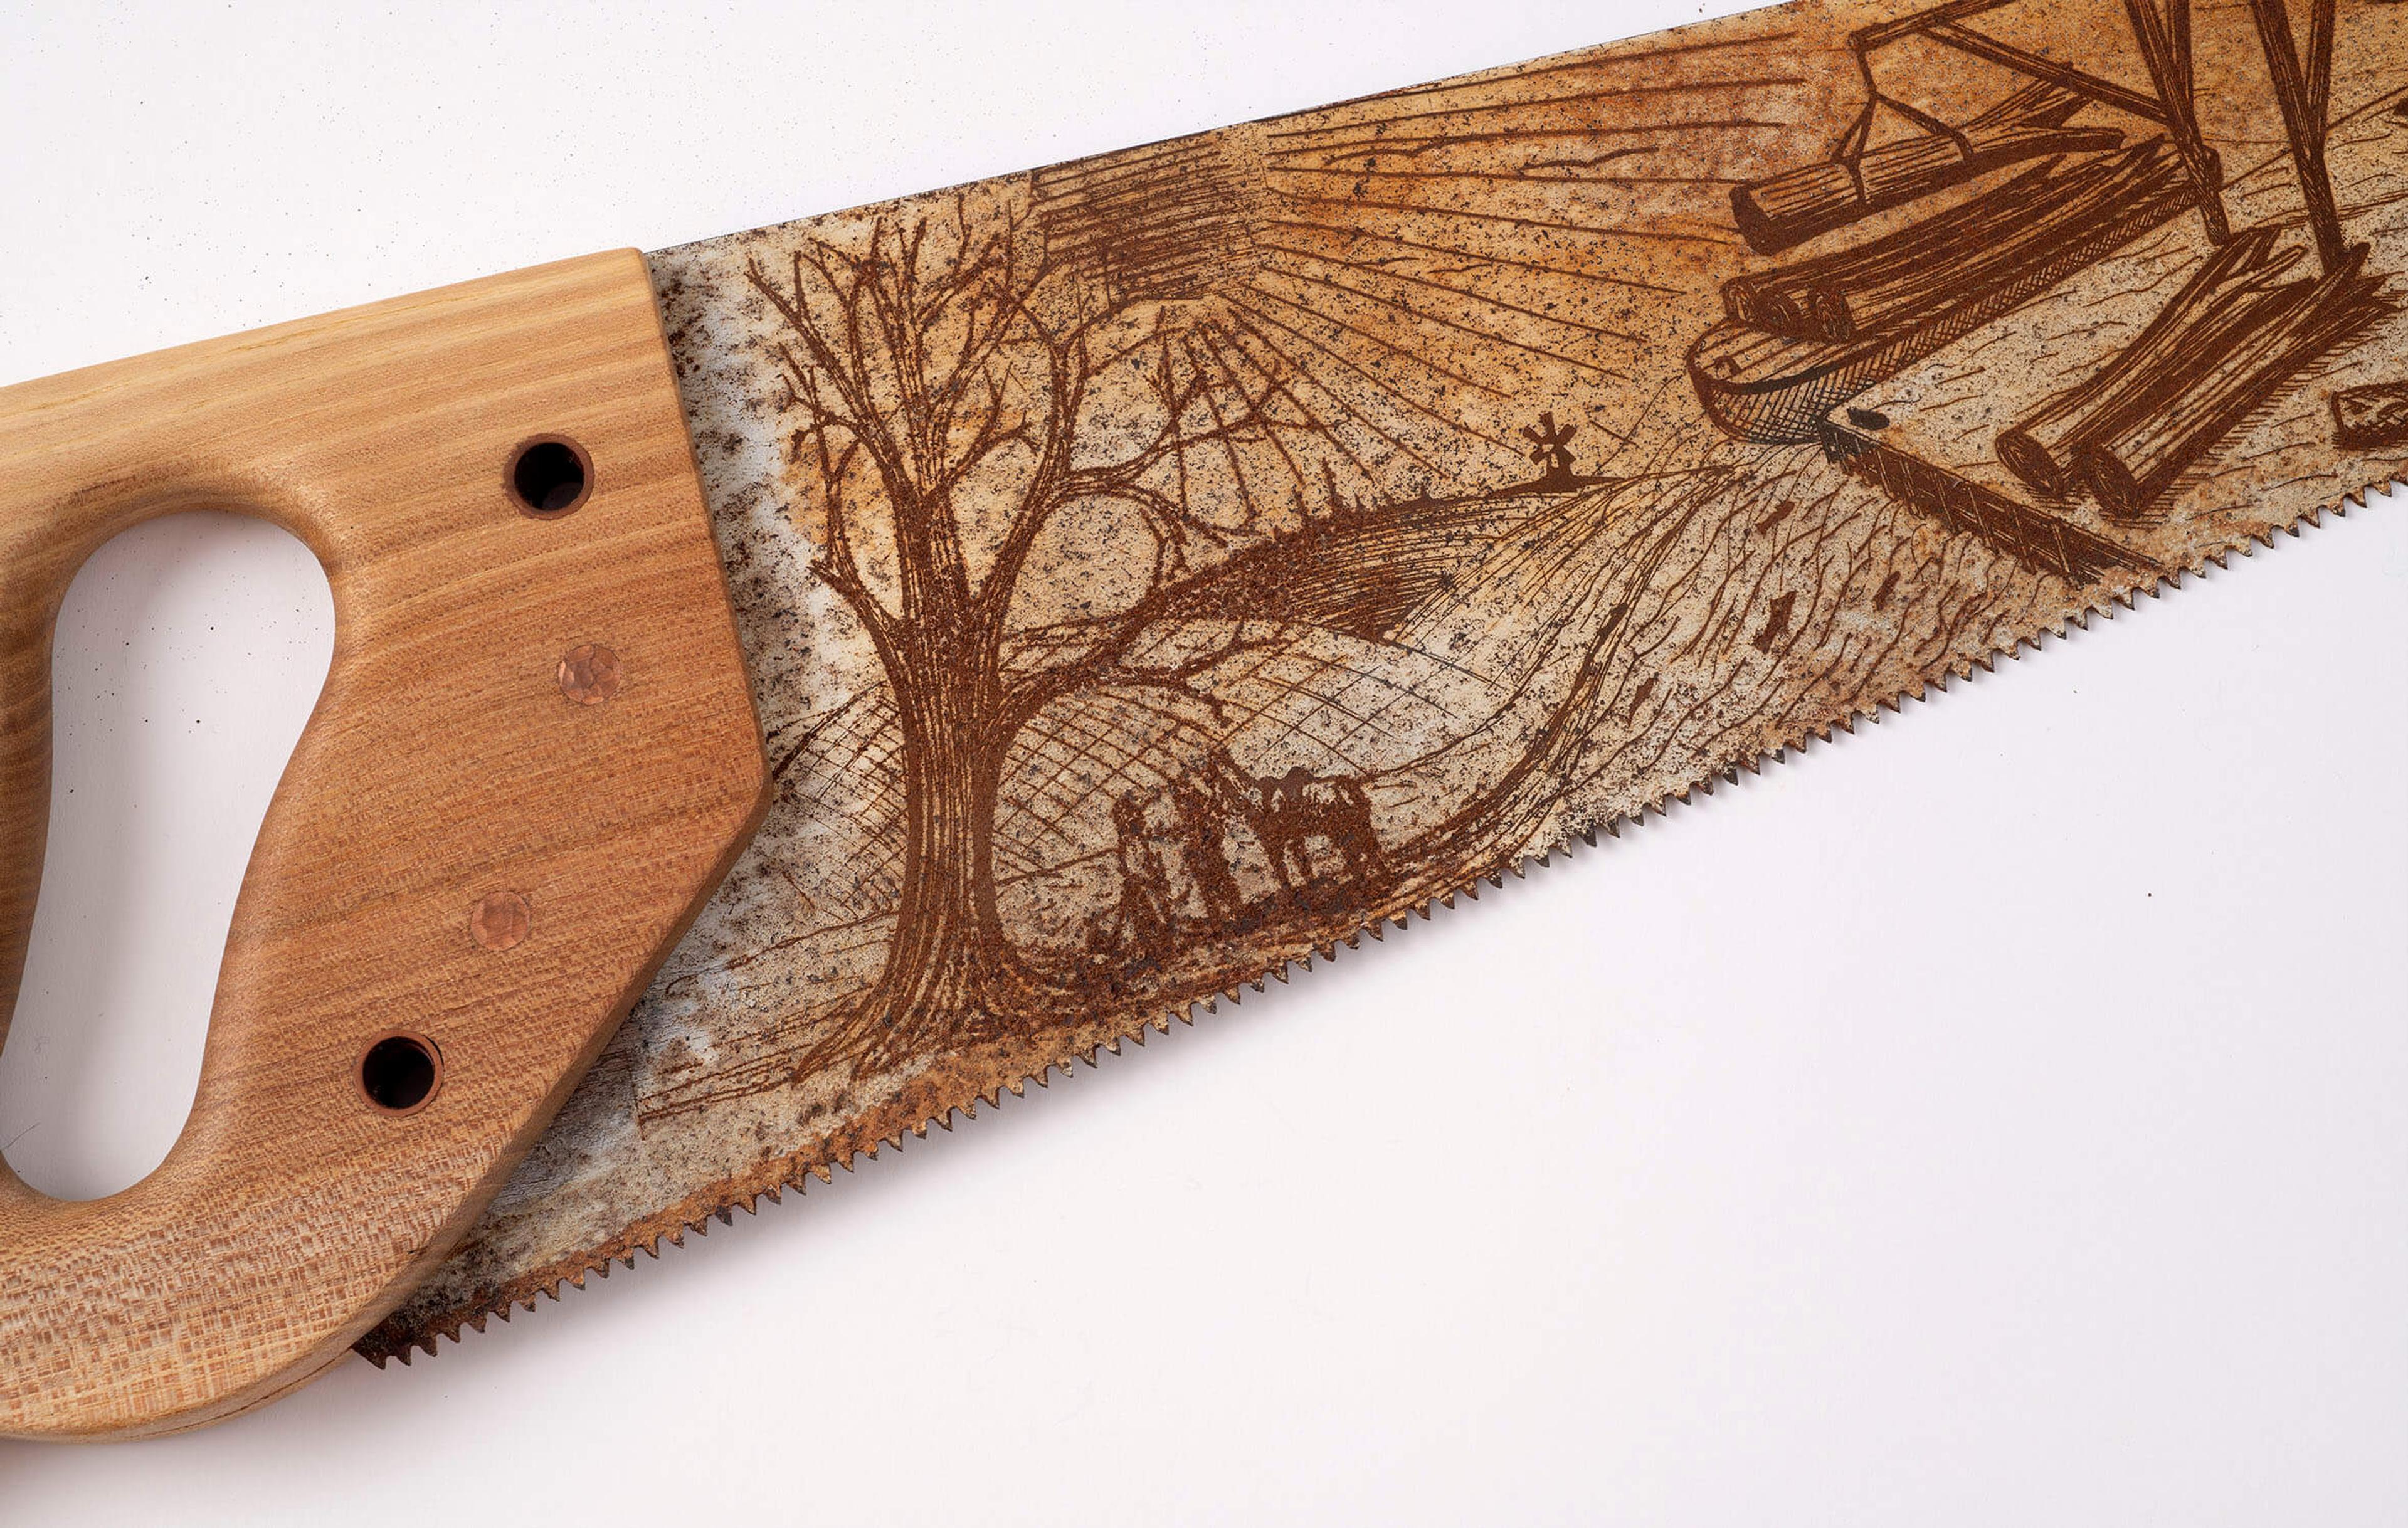 A close up of a saw with an illustrated blade that depicts a landscape.